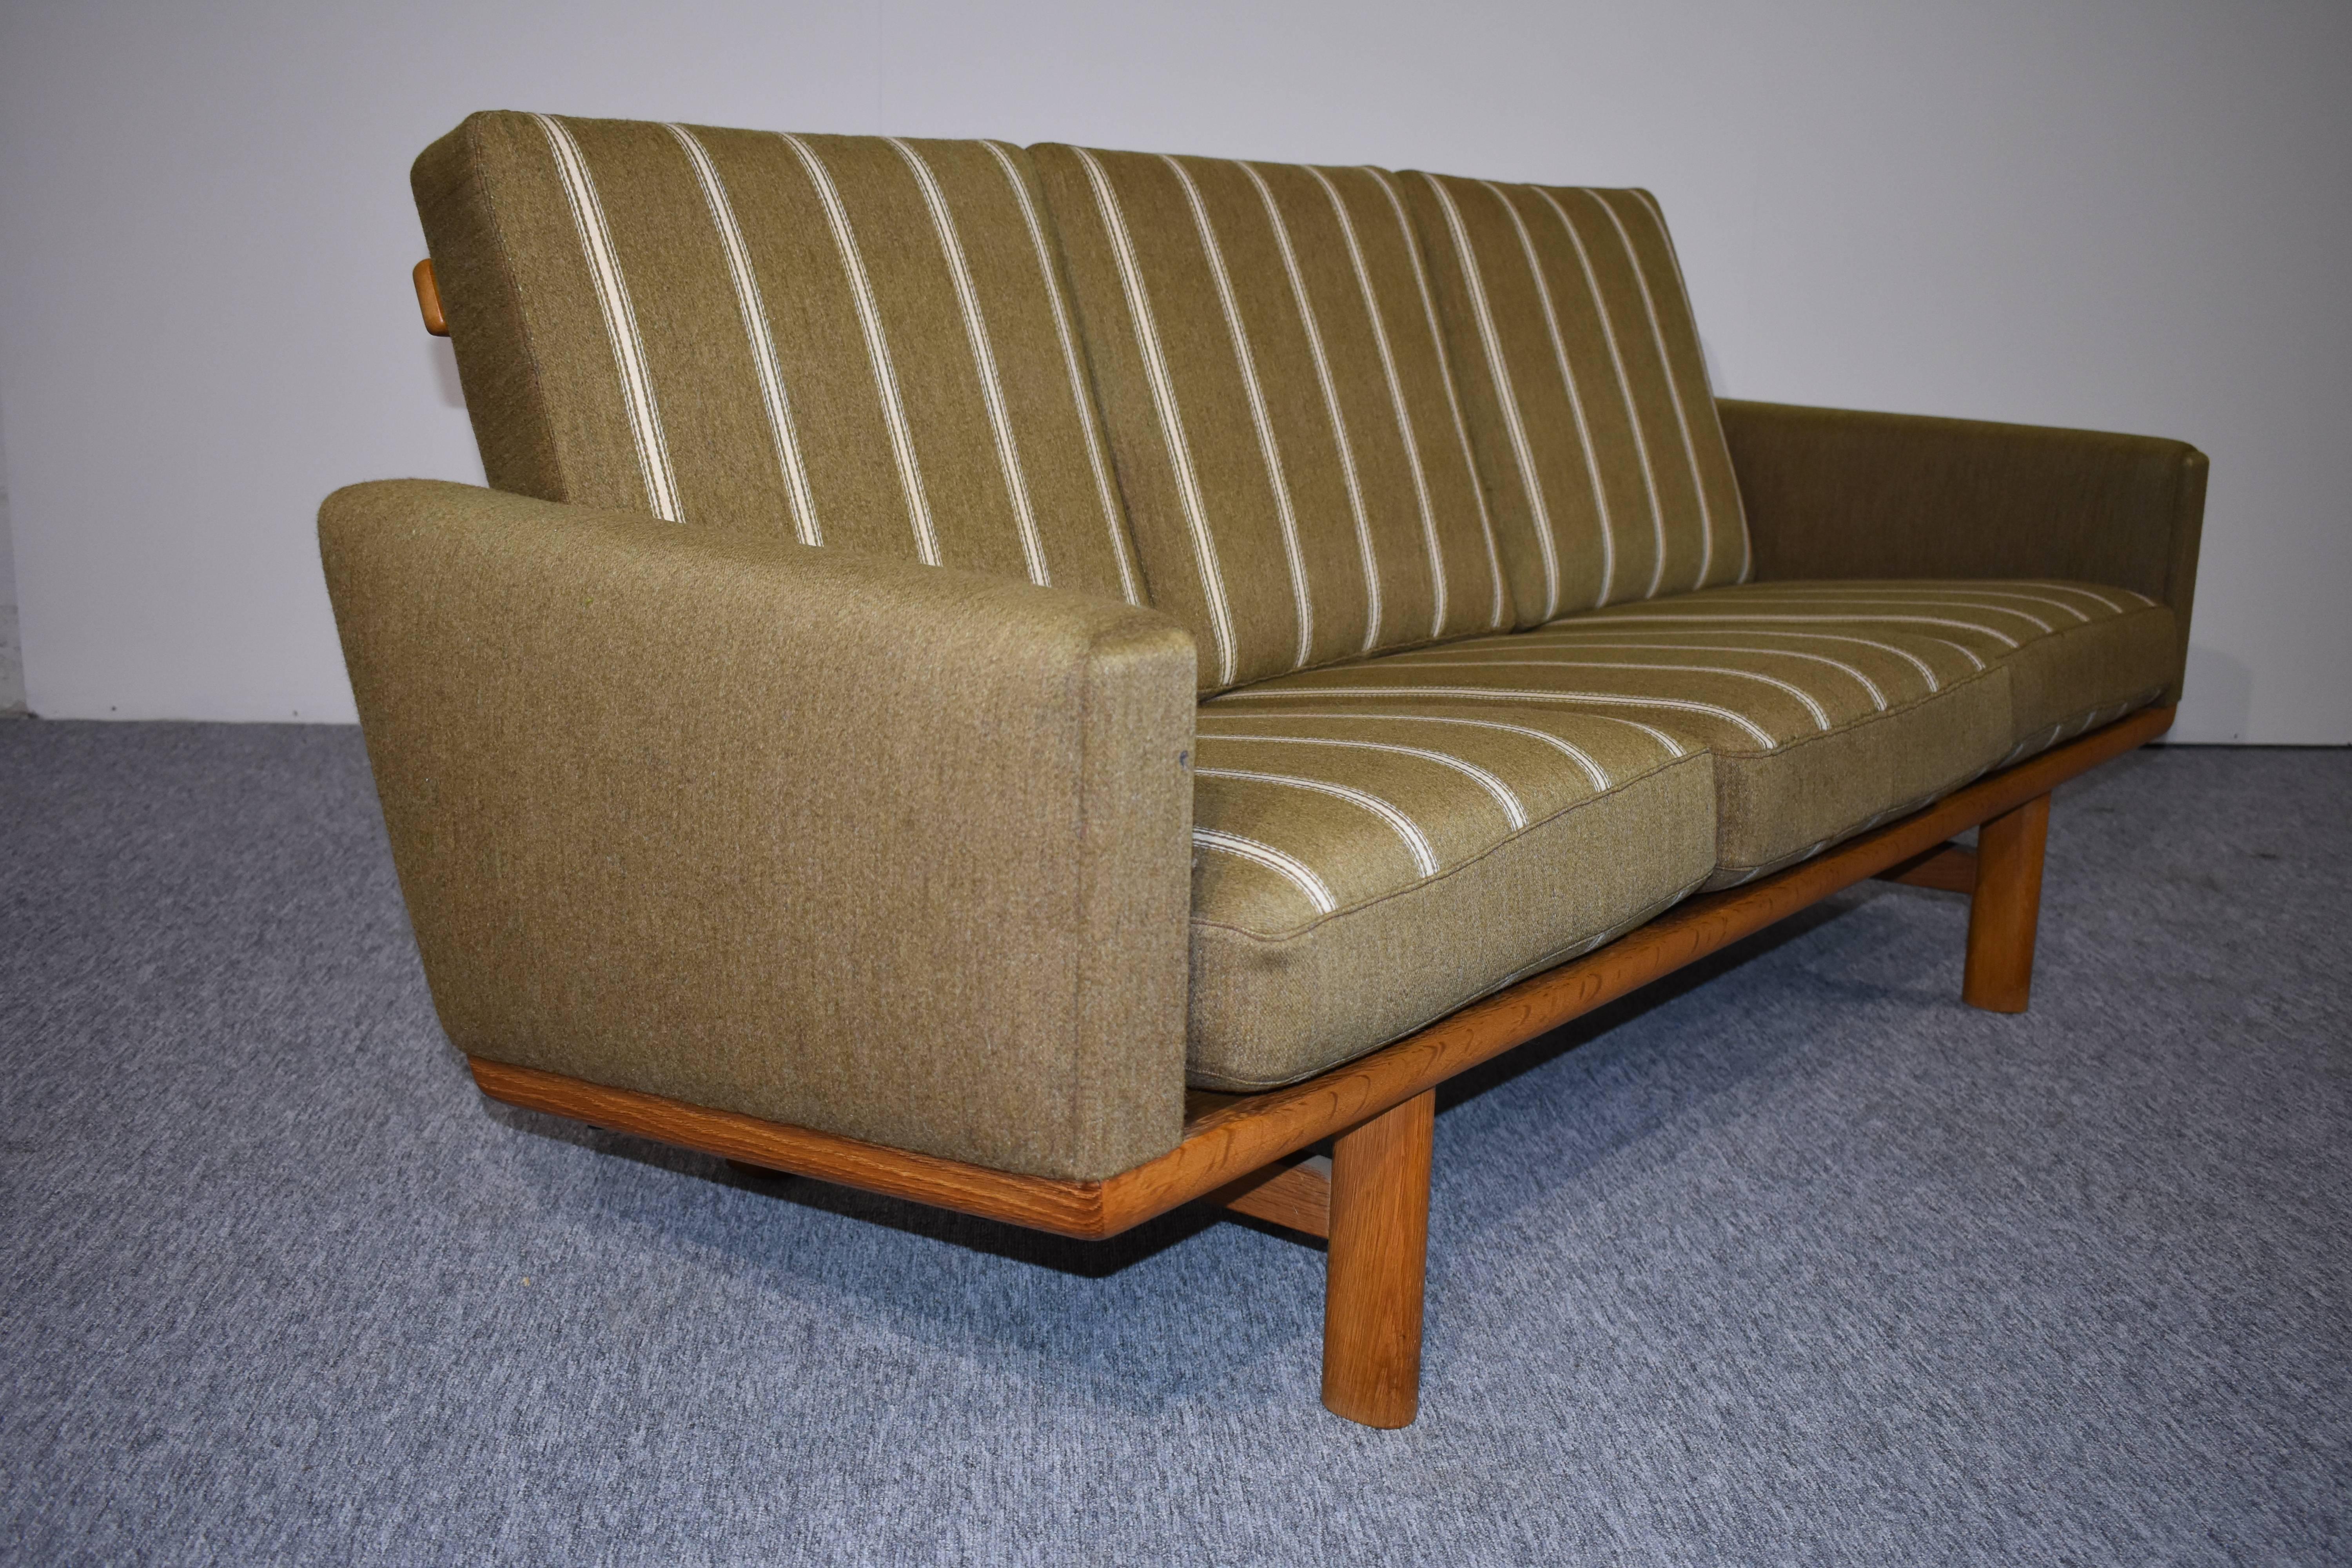 A beautiful sofa designed by Hans Jørgen Wegner for GETAMA Gedsted, the sofa is made in oak, with retro upholstery. This sofa was Wegner's most popular sofa design, because of its linear and Minimalist design. The sofa looks beautiful from all